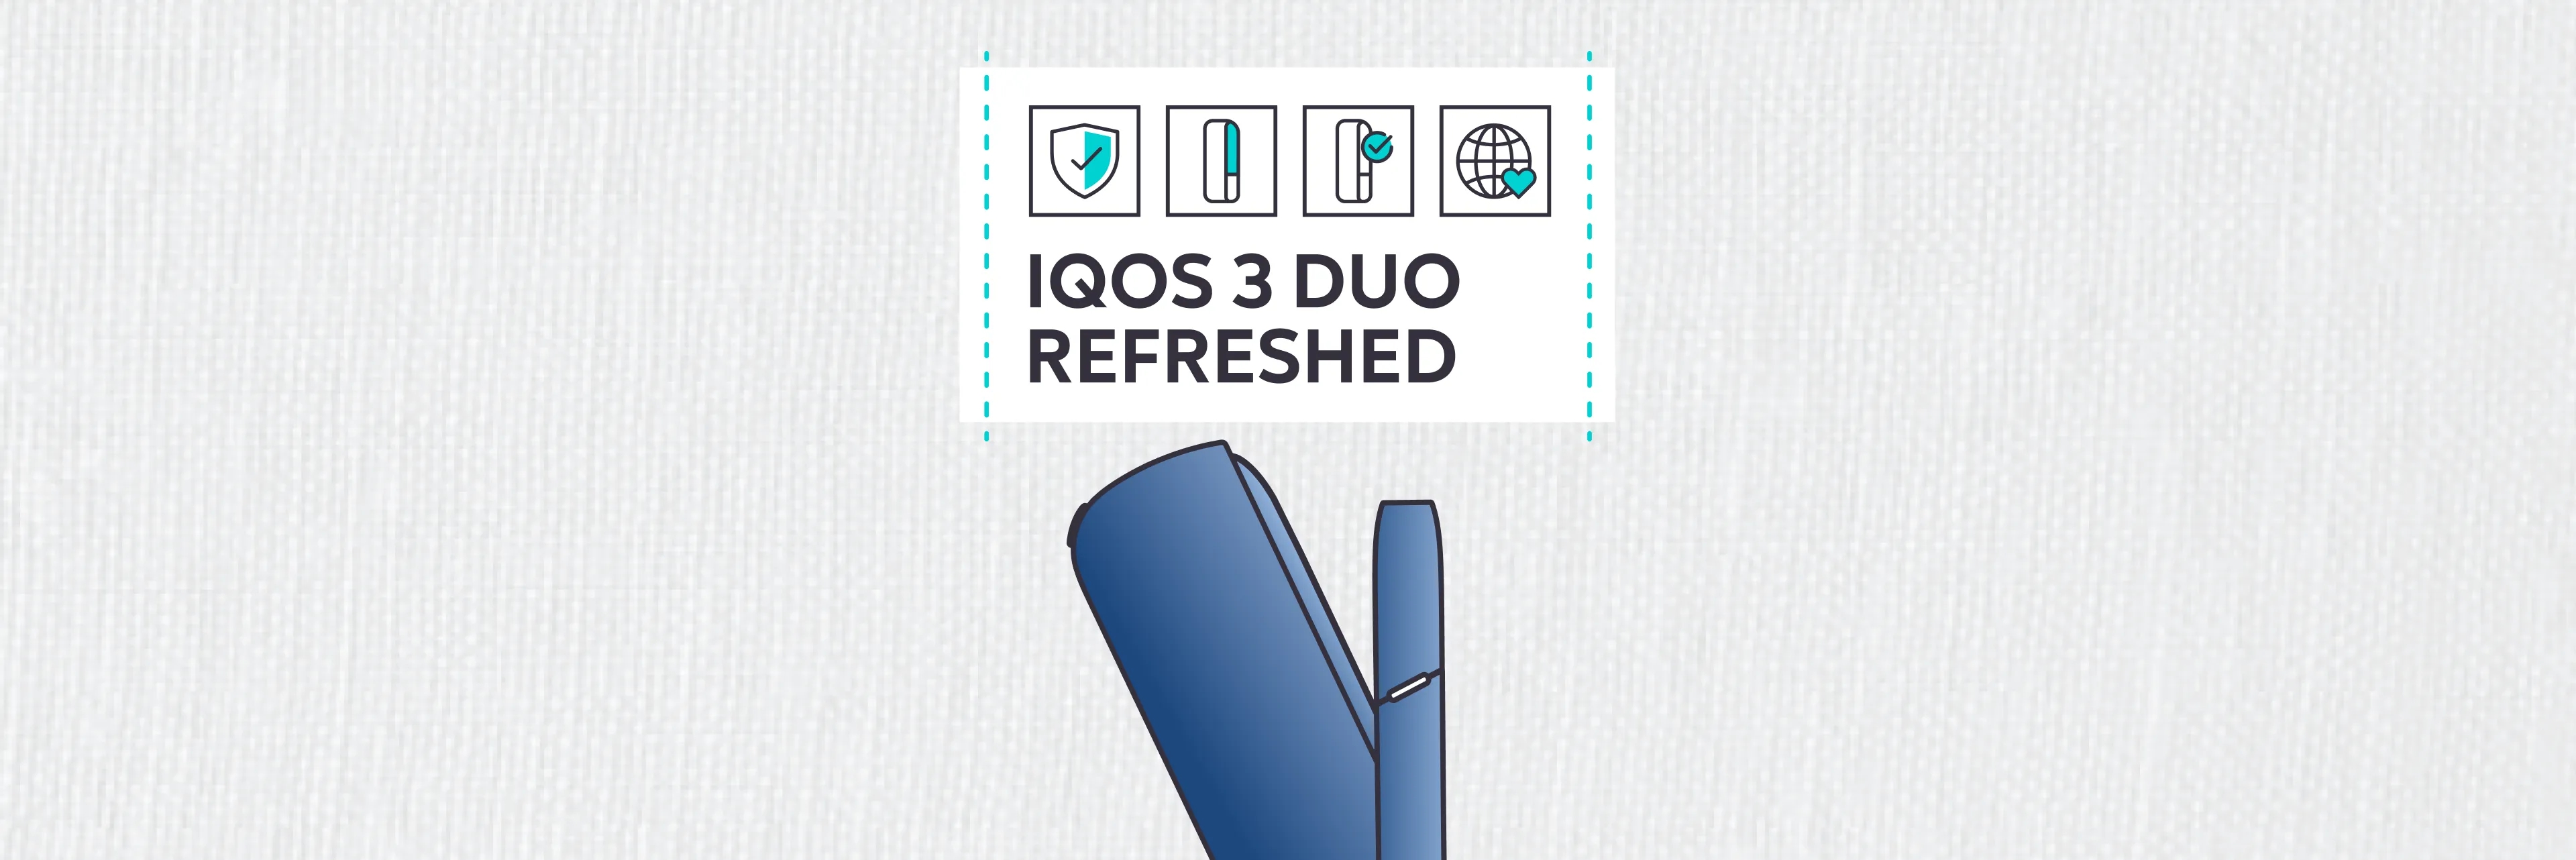 iqos-duo-refreshed-give-new-life-to-device